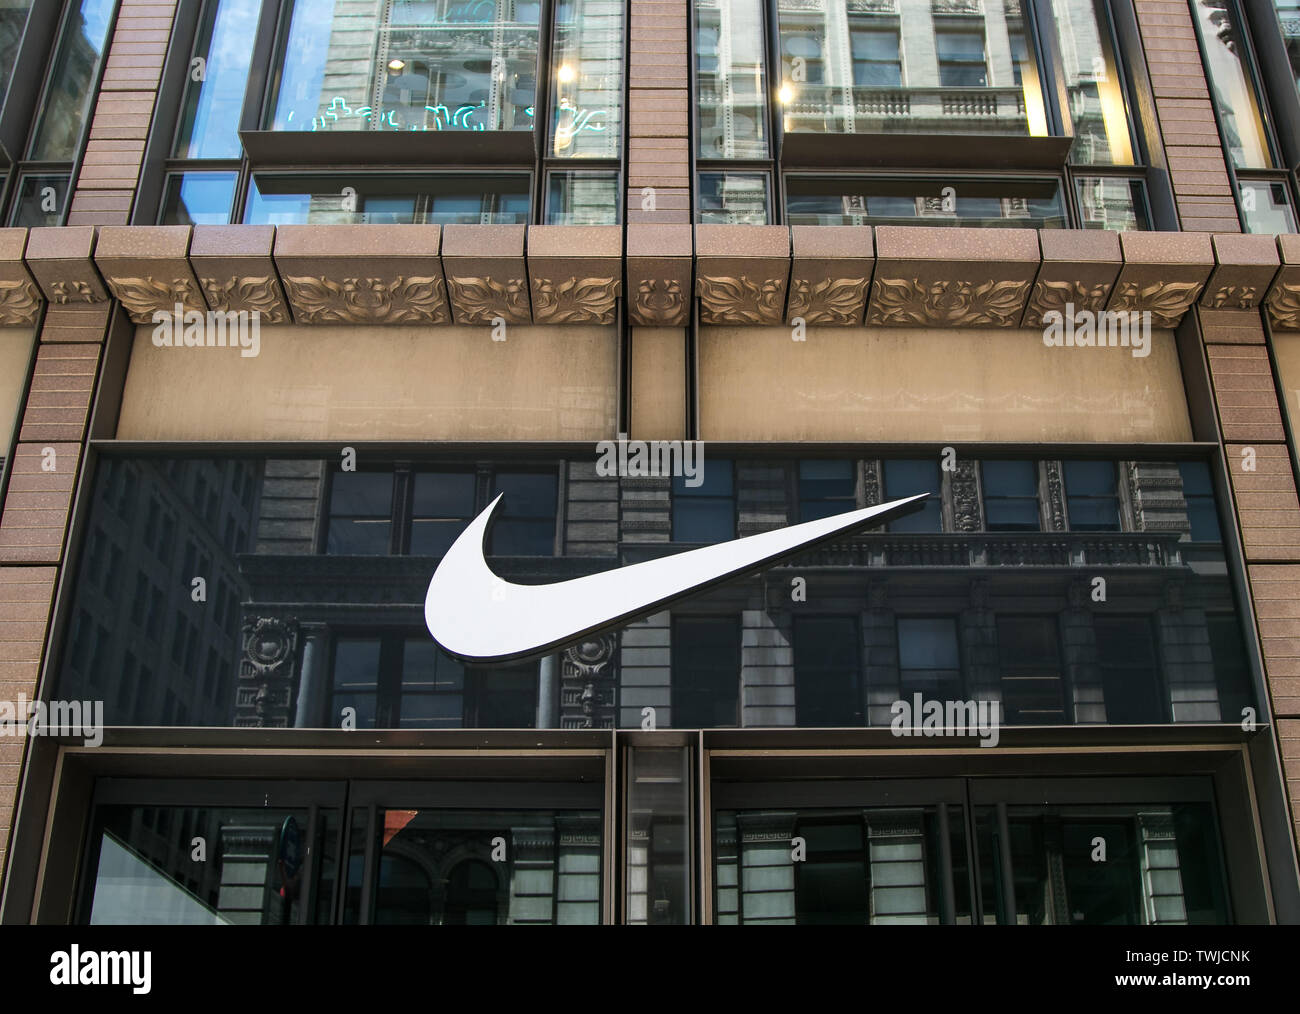 New York, 6/15/2019: Nike's logo is displayed above the entrance to their store in SoHo. Stock Photo